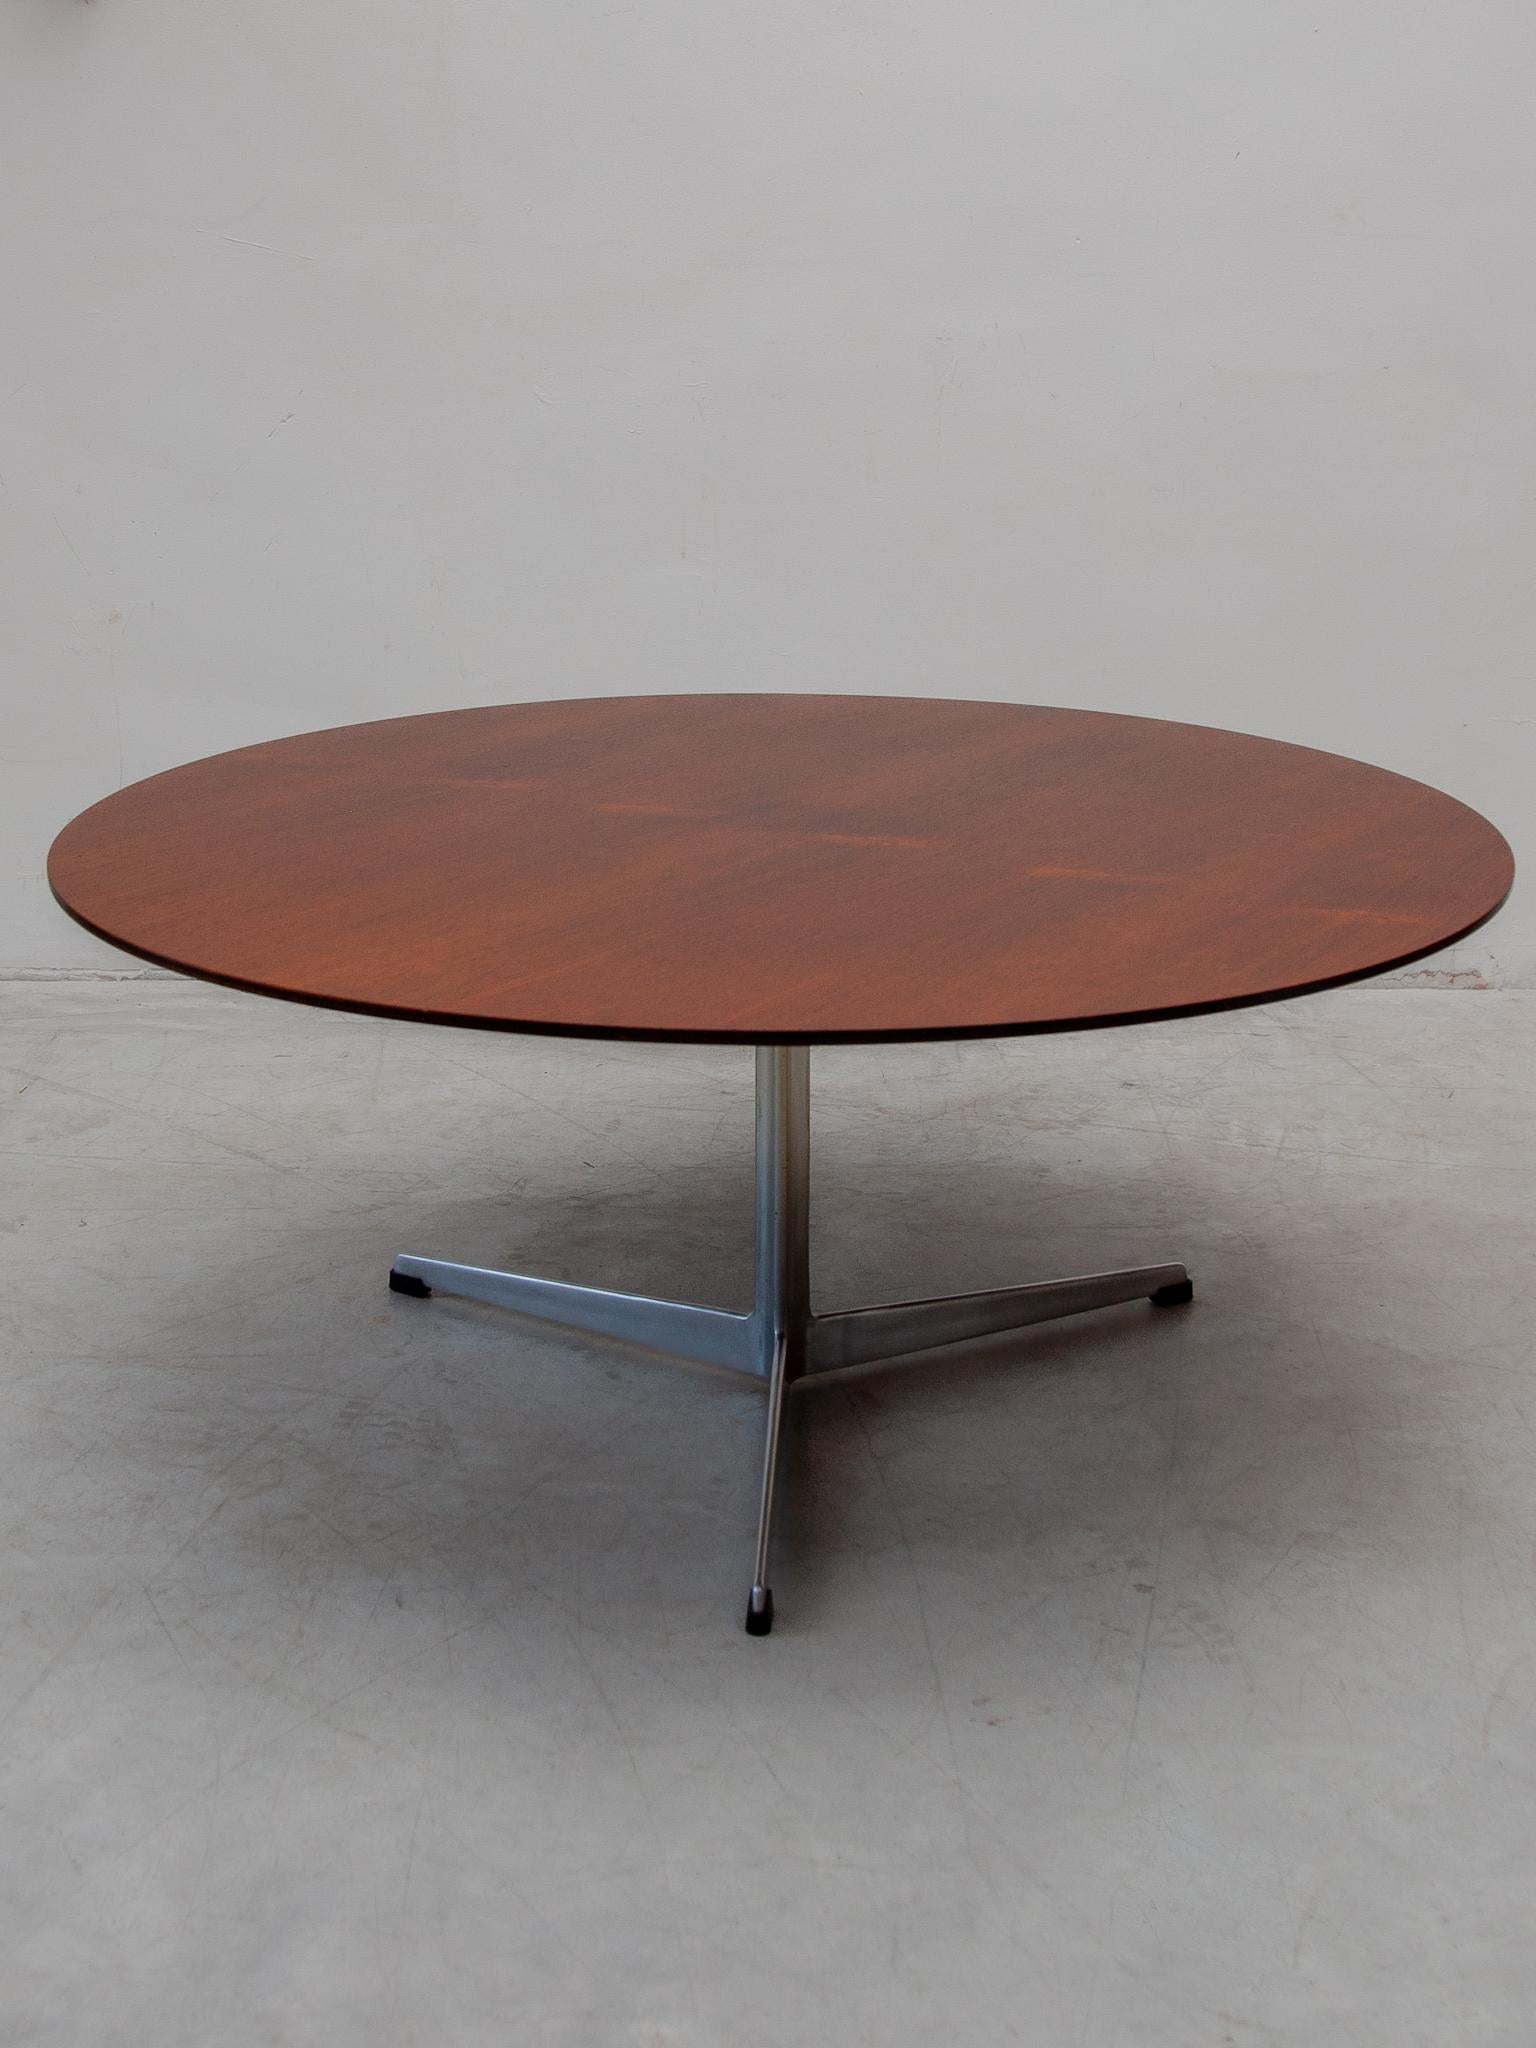 Mid-20th Century Fritz Hansen Round Coffee Table designed by Arne Jacobsen For Sale